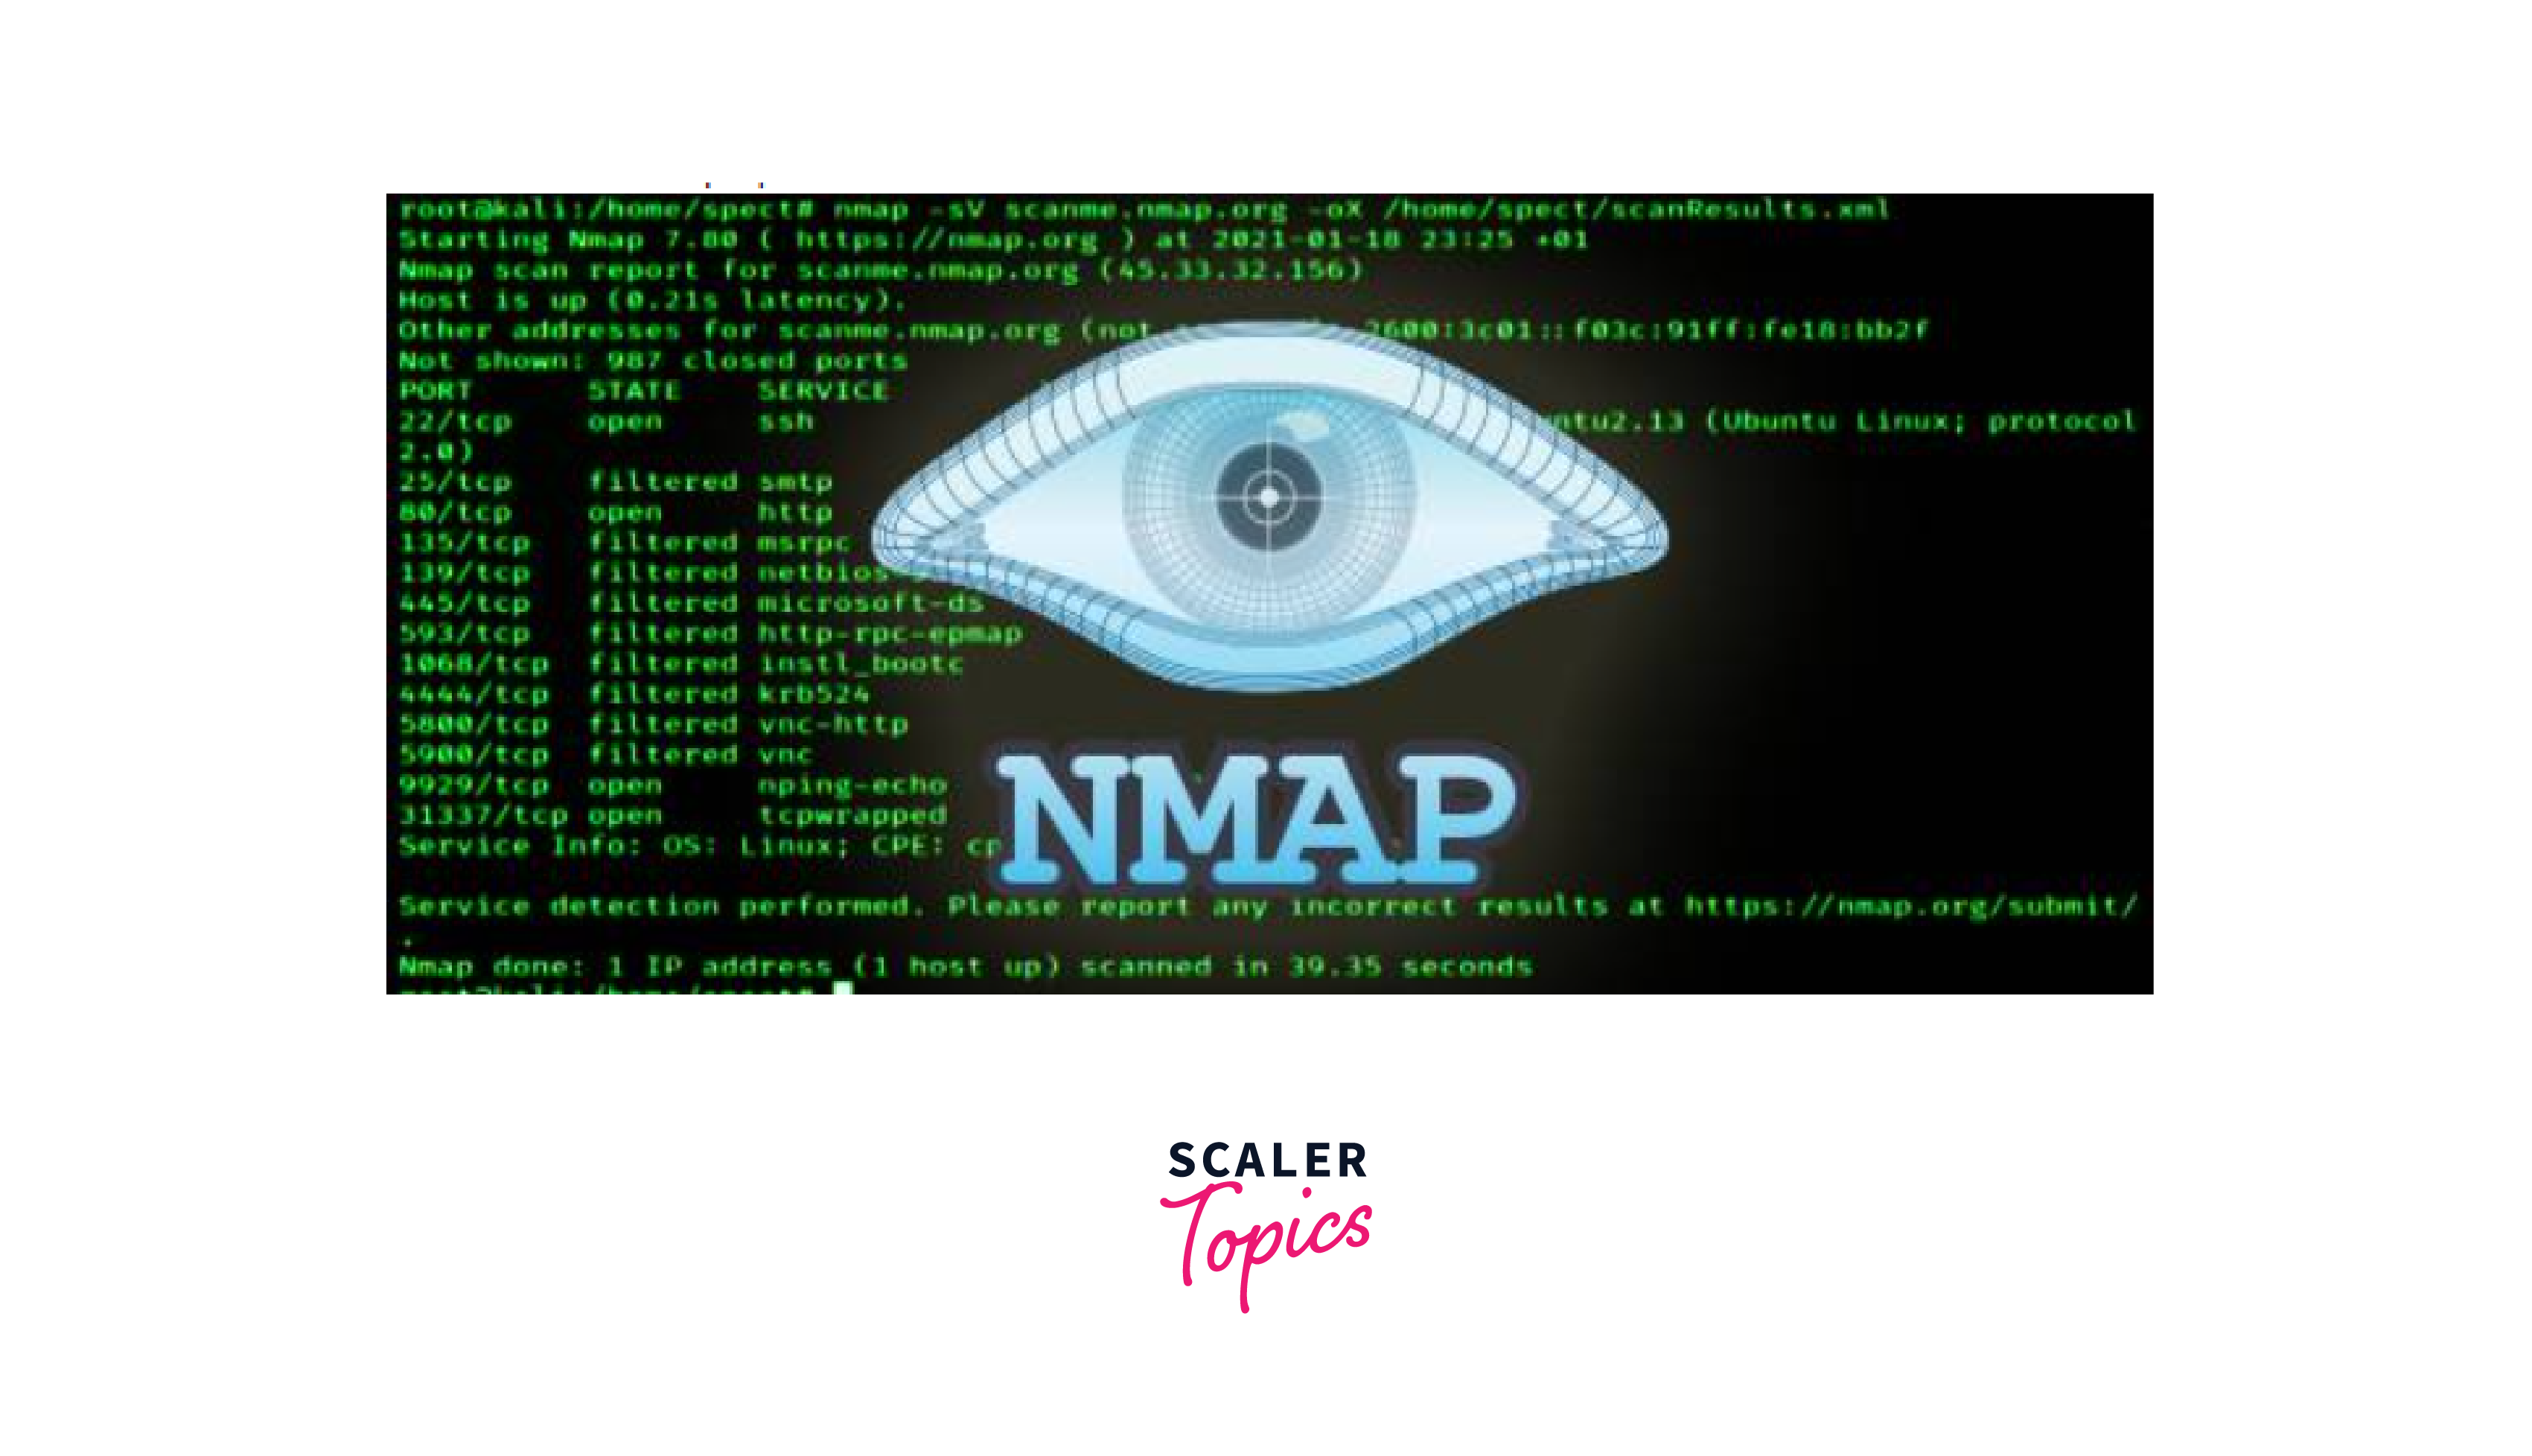 Scanning and Enumeration Tools